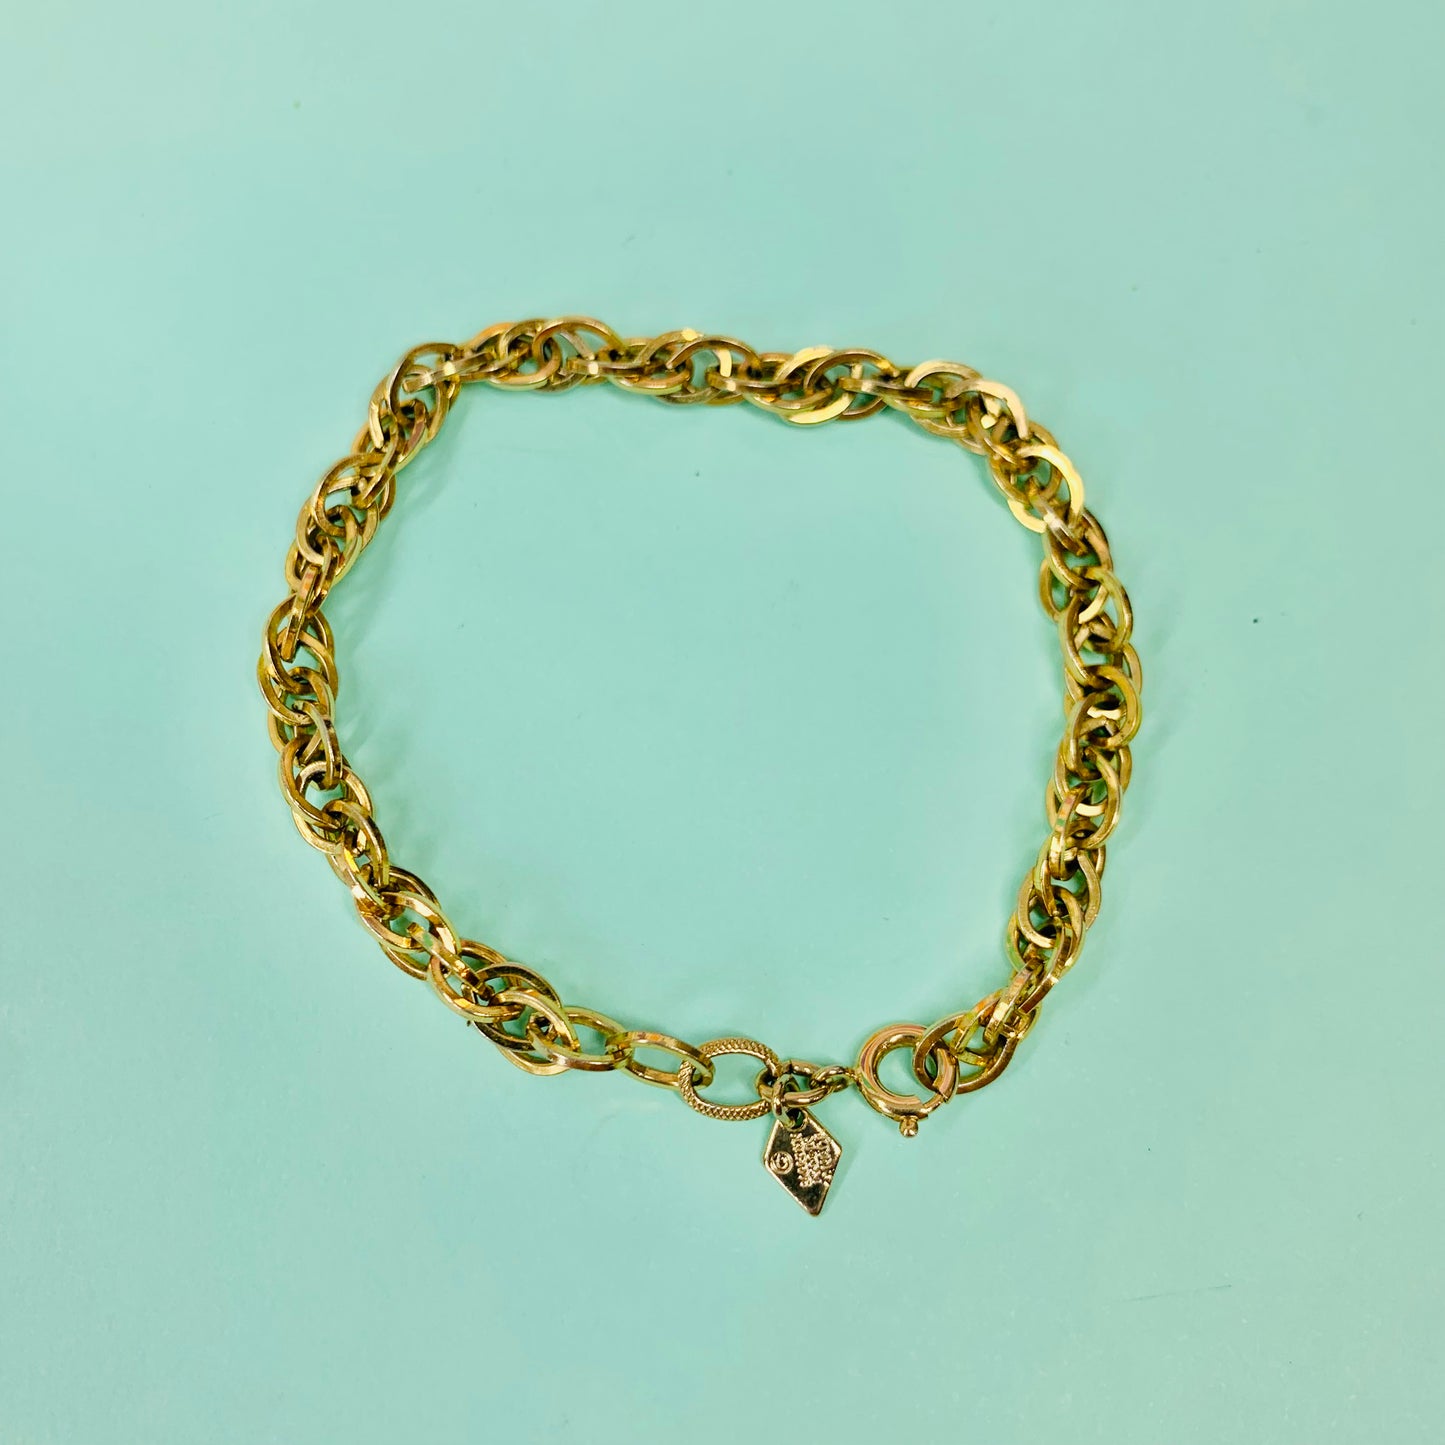 Rare 1960s Sara Coventry gold plated bracelet with multiple loop links